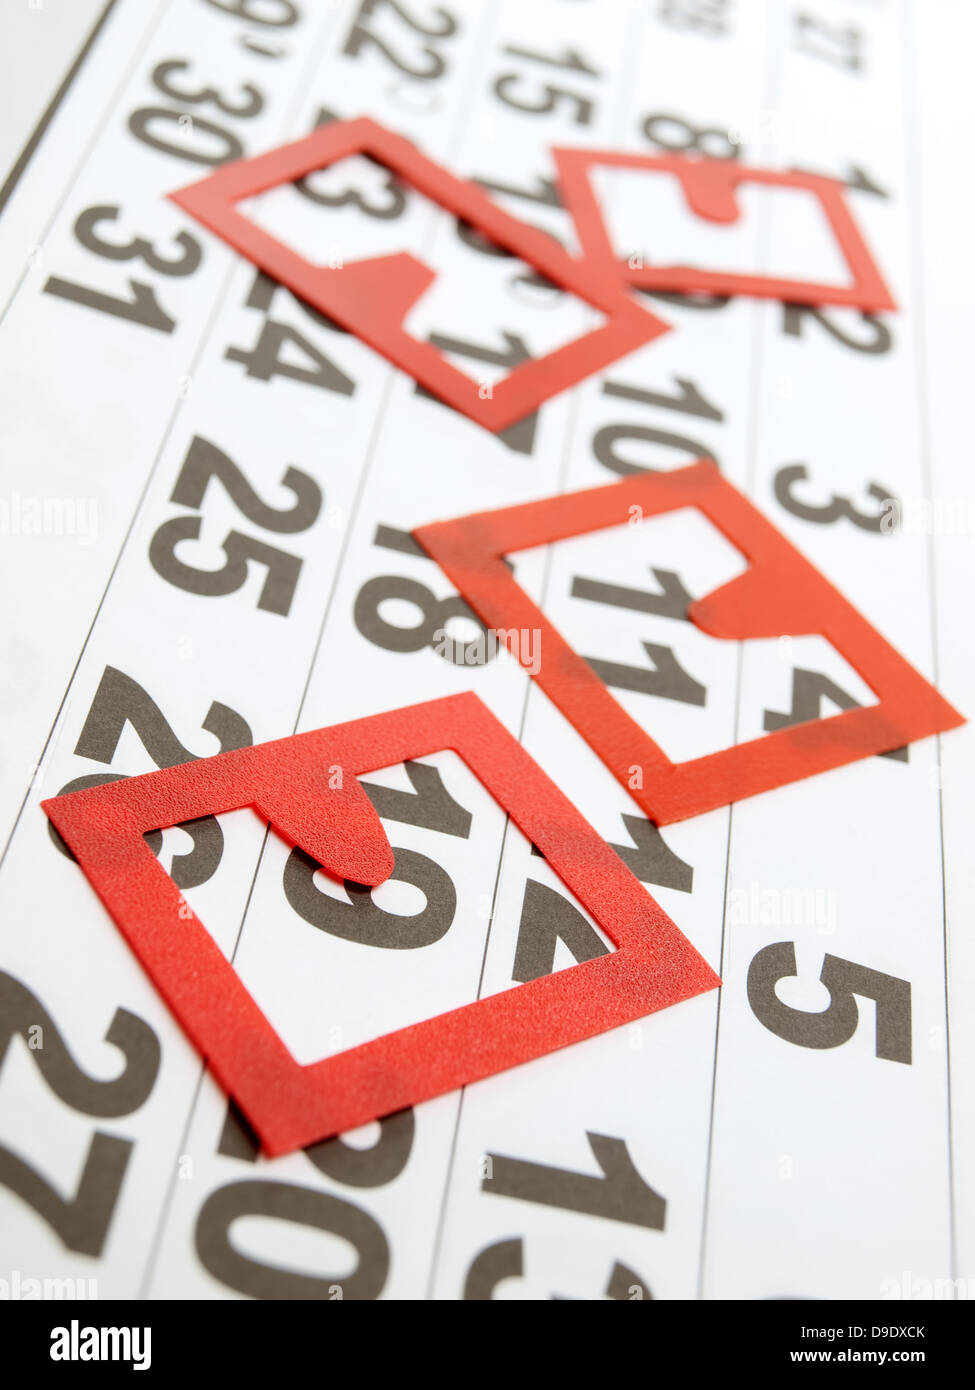 Generic calendar sheet with several red marking badges on it. Stock Photo